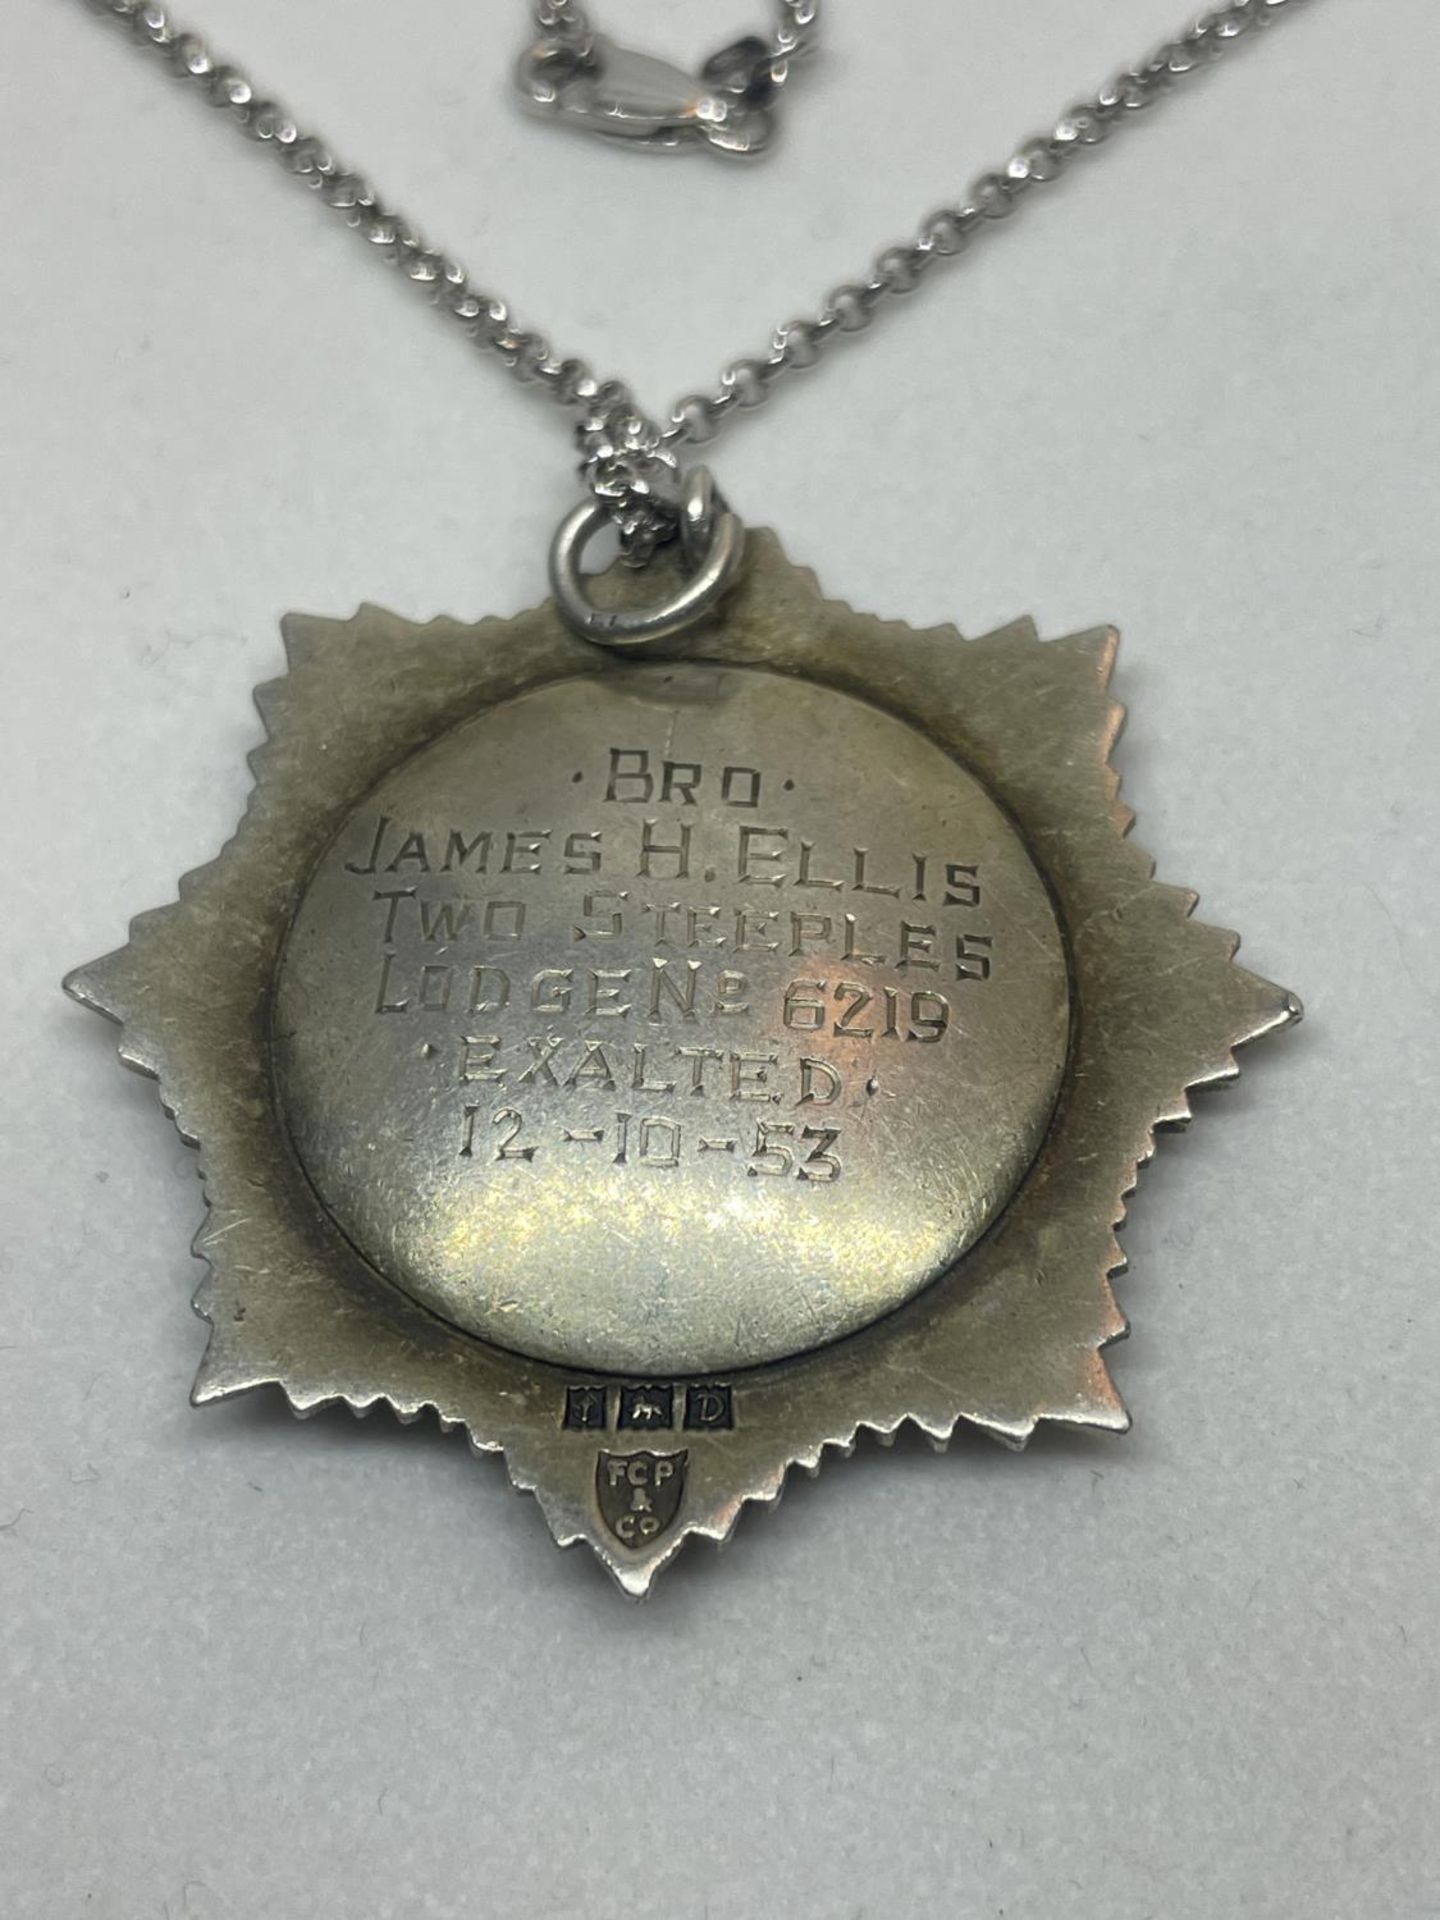 A SILVER NECKLACE WITH A HALLMARKED BIRMINGHAM SILVER MASONIC MEDAL IN A PRESENTATION BOX - Image 3 of 3